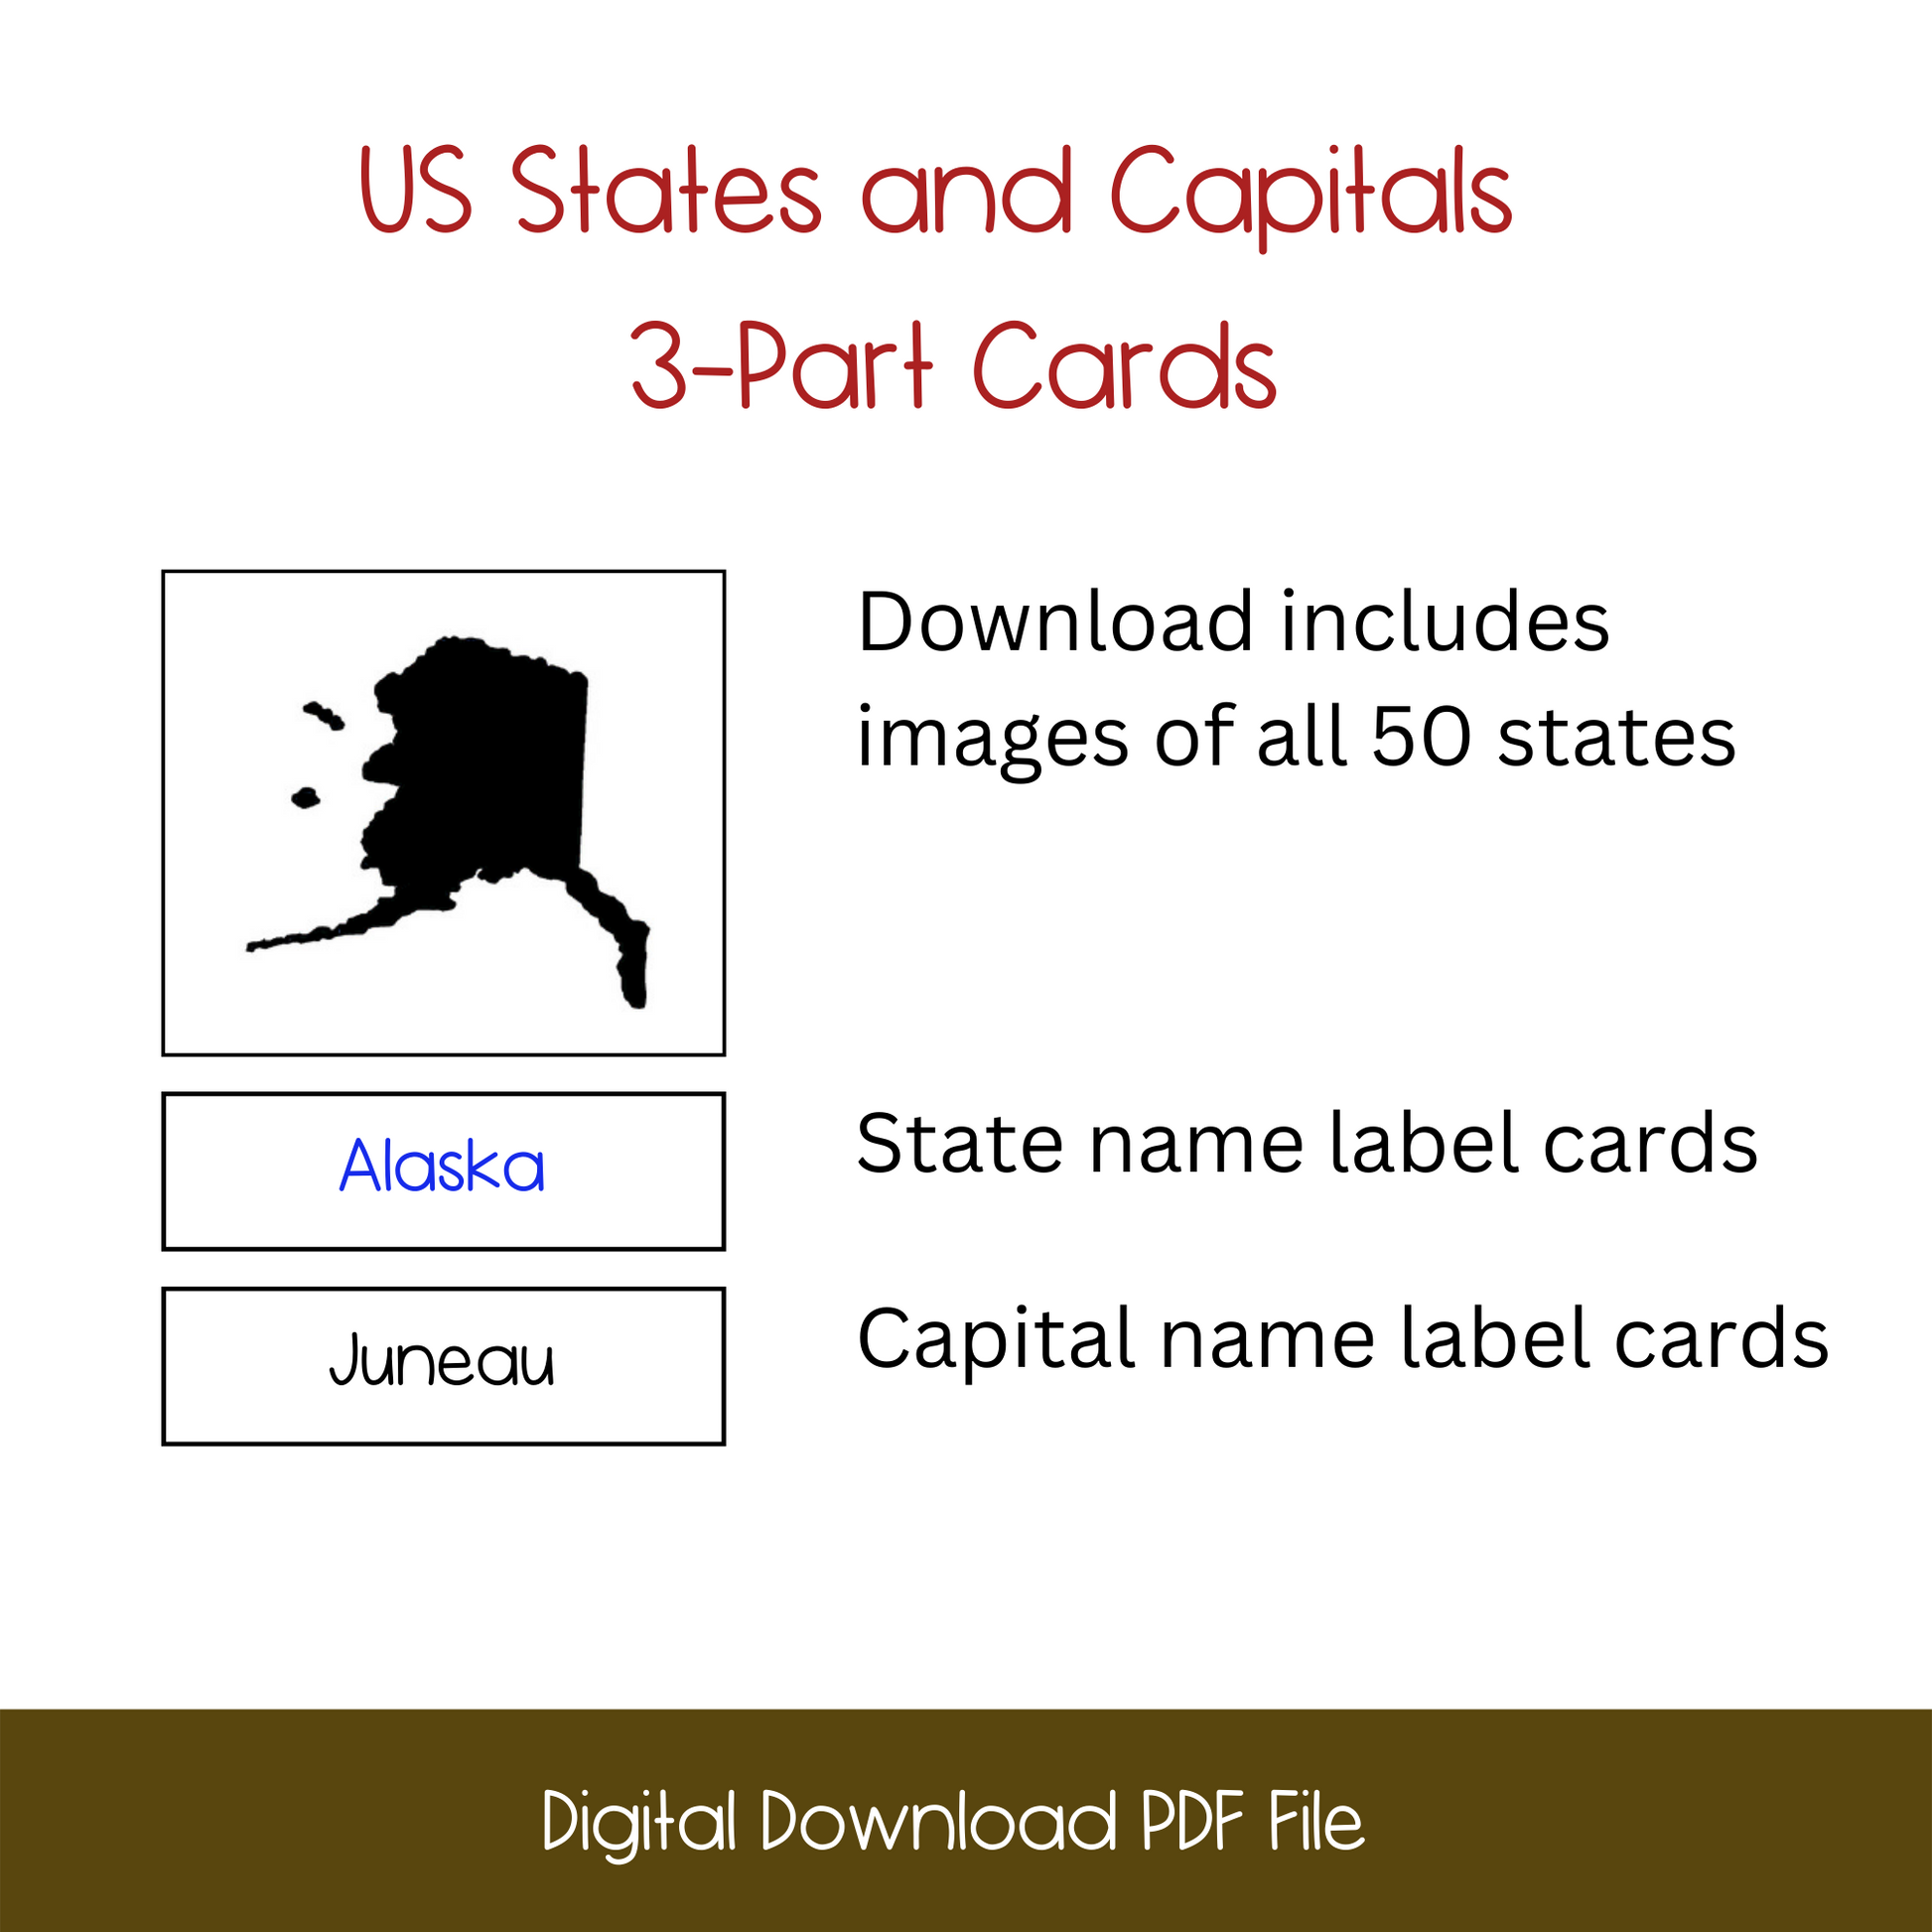 printable us states and capitals 3-part cards, nomenclature cards lesson activity